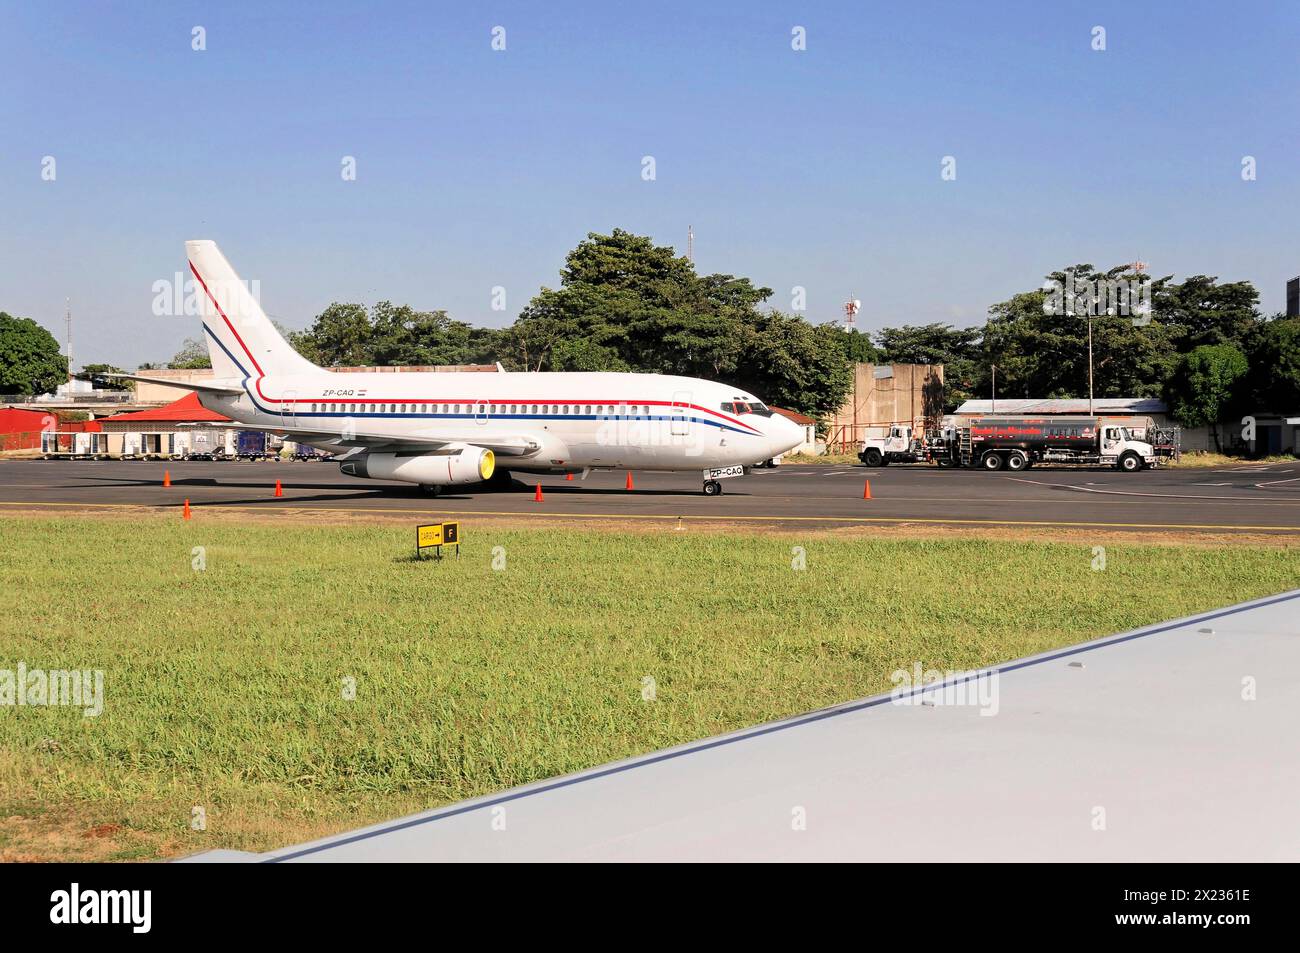 AUGUSTO C. SANDINO Airport, Managua, Somewhat outdated aeroplane on a tarmac in front of airport buildings, Nicaragua, Central America, Central Stock Photo